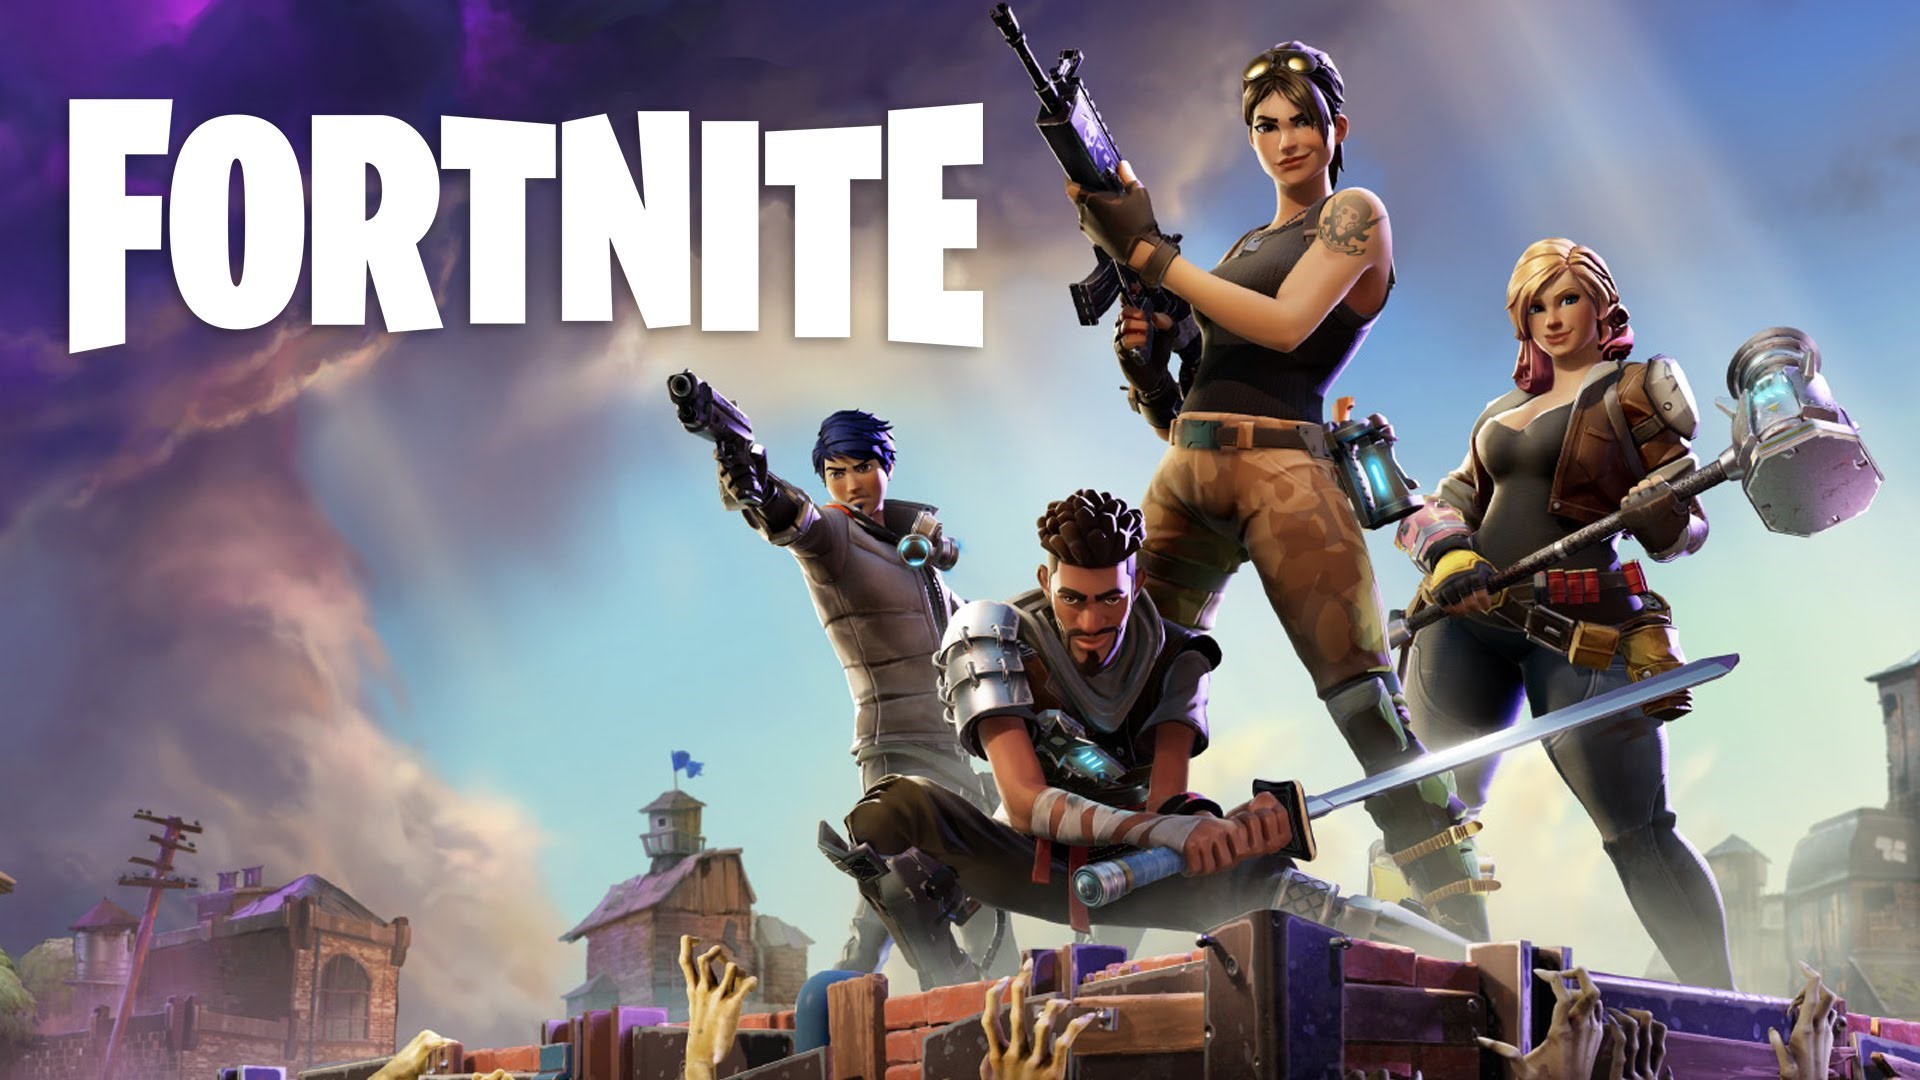 Fortnite, the Battle Royale player-vs-player game